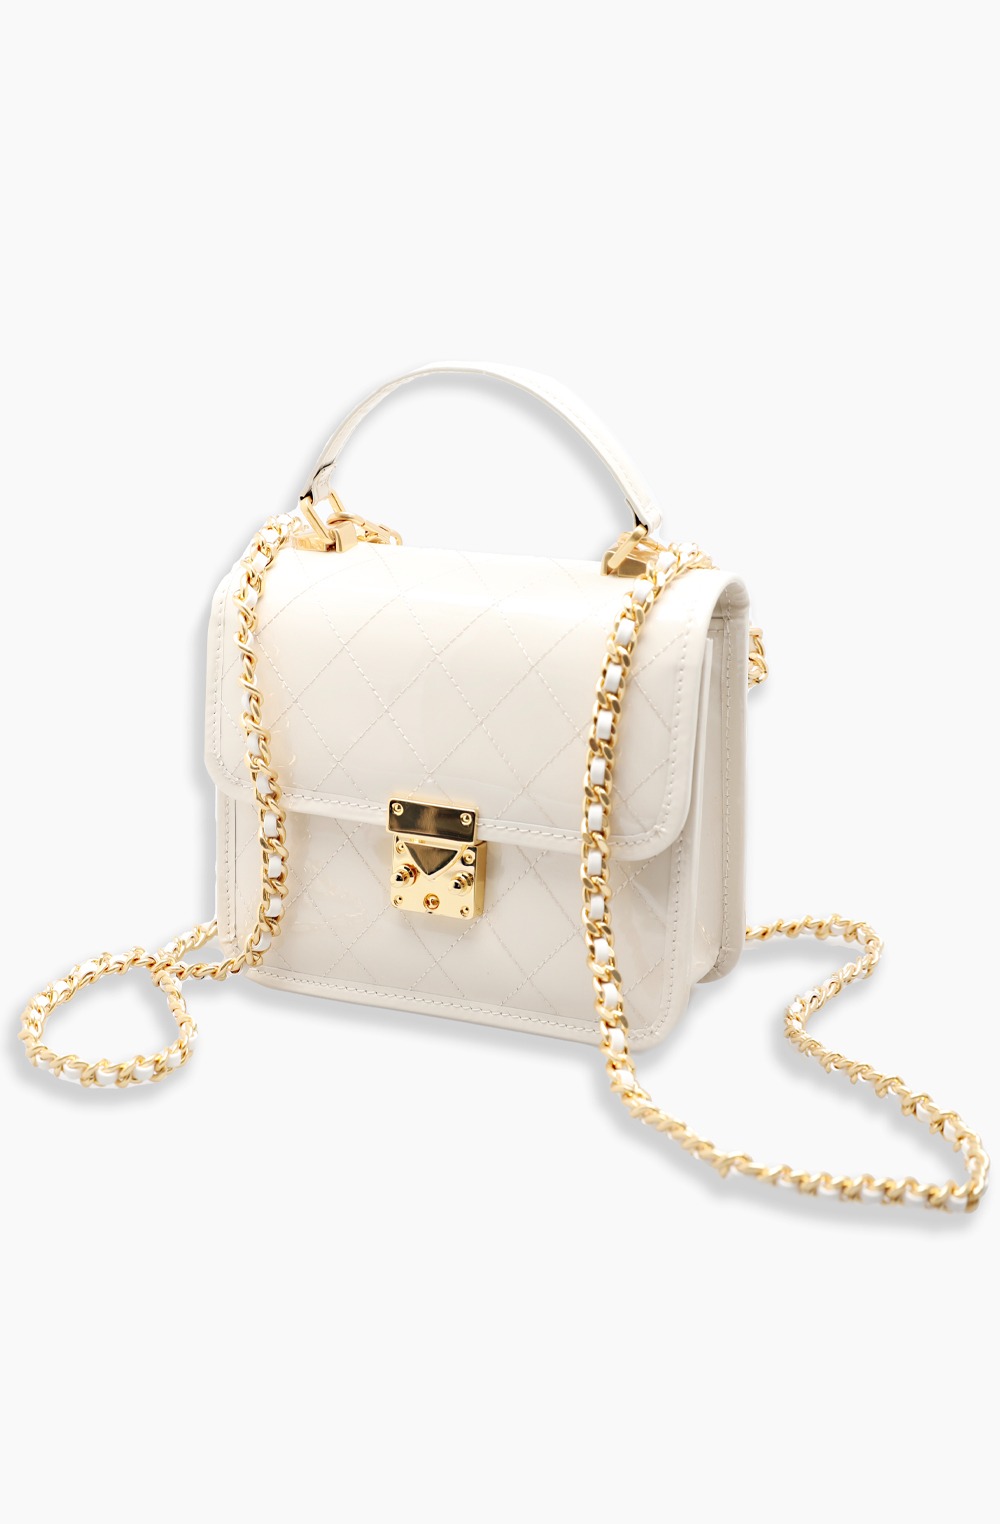 Myeyeko Exclusive Line - SOPHIA BAG (Leather by, FAEDA MADE IN ITALY) Ivory&amp;Gold